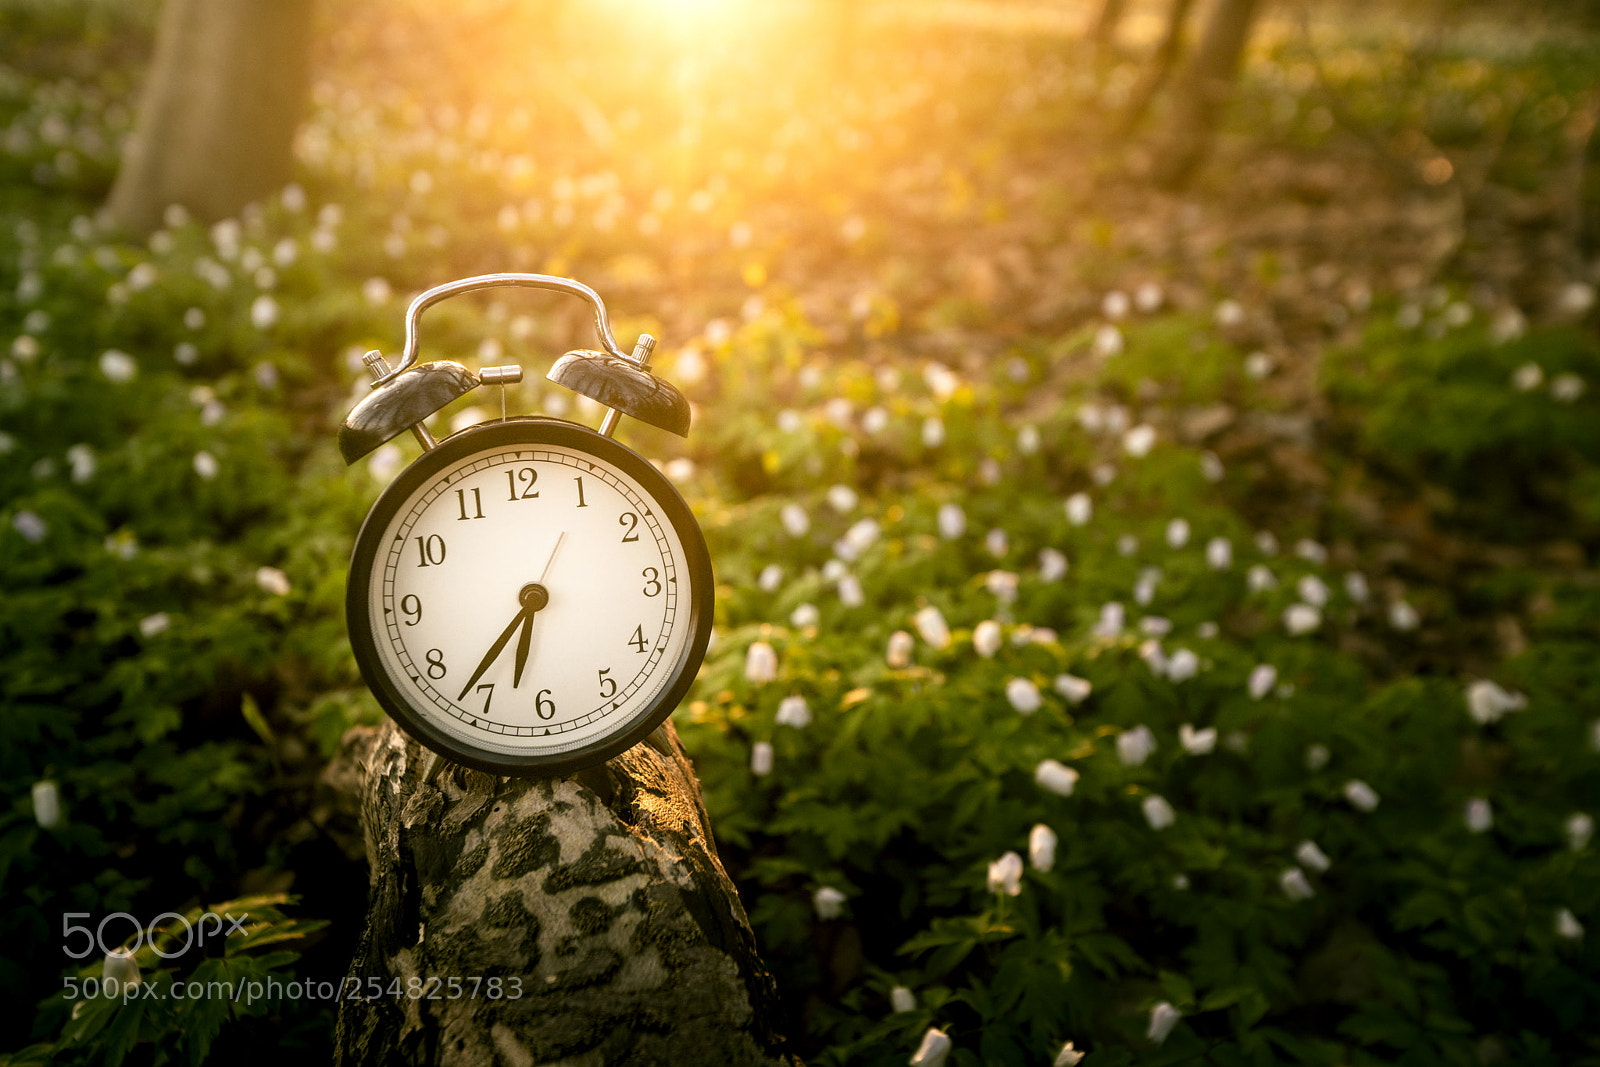 Sony a99 II sample photo. Alarm clock in the photography